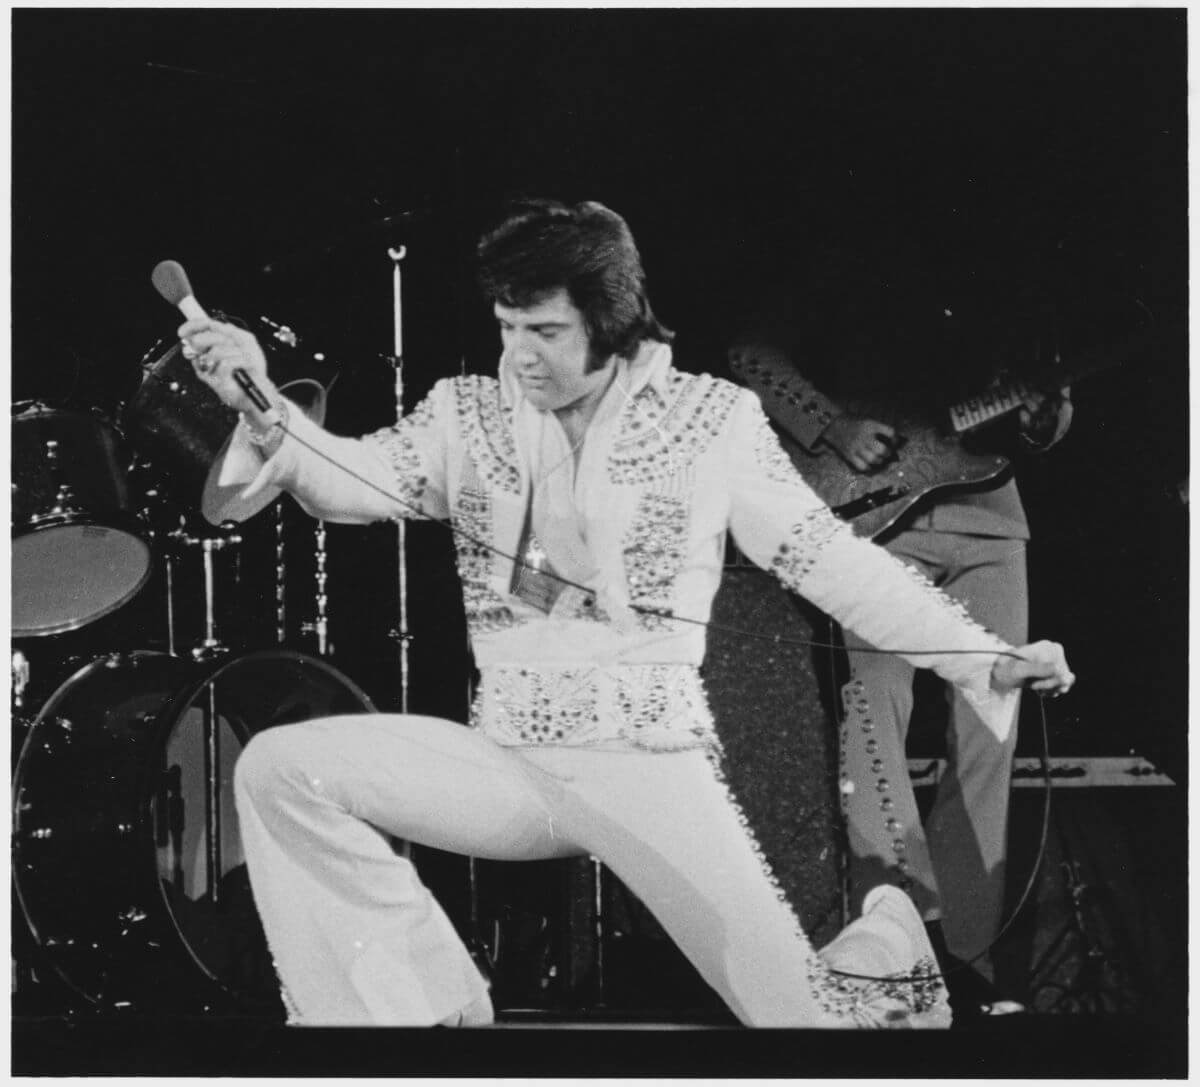 A black and white picture of Elvis kneeling during a concert and holding a microphone.